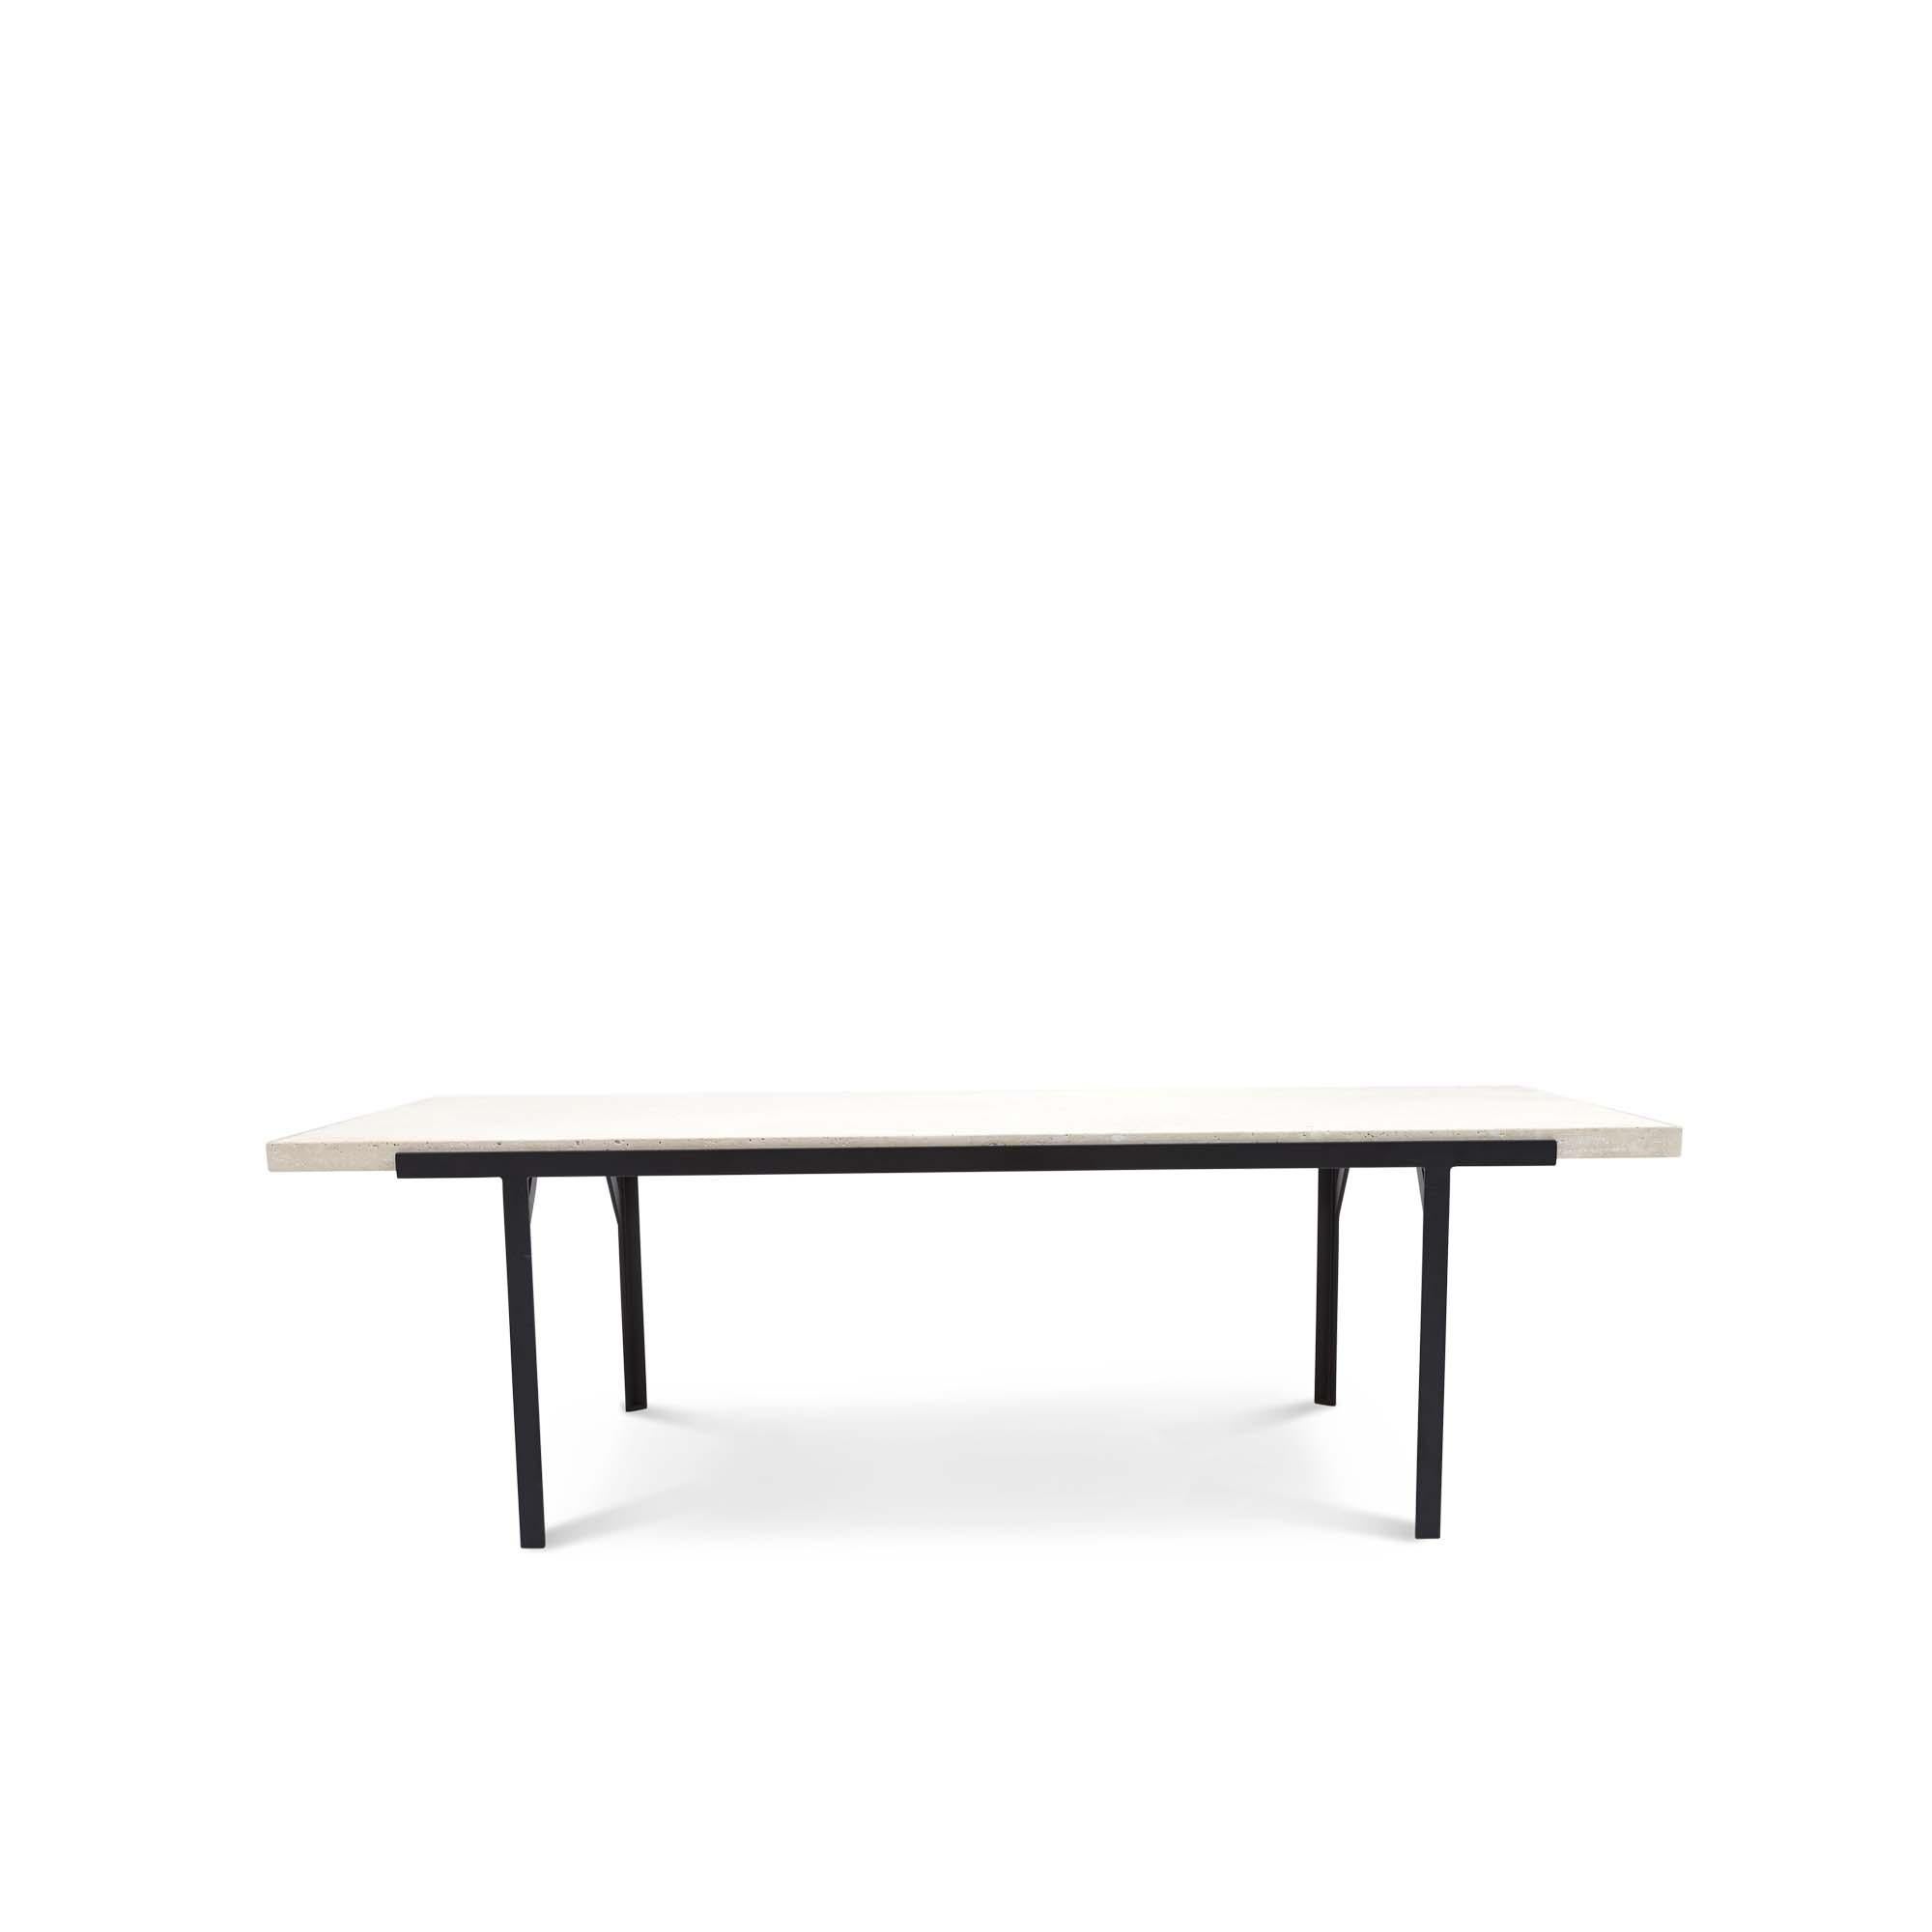 The Montrose coffee table features a powdercoated steel base with a minimal honed travertine stone top. For indoor or outdoor use.

The Lawson-Fenning Collection is designed and handmade in Los Angeles, California. Reach out to discover what